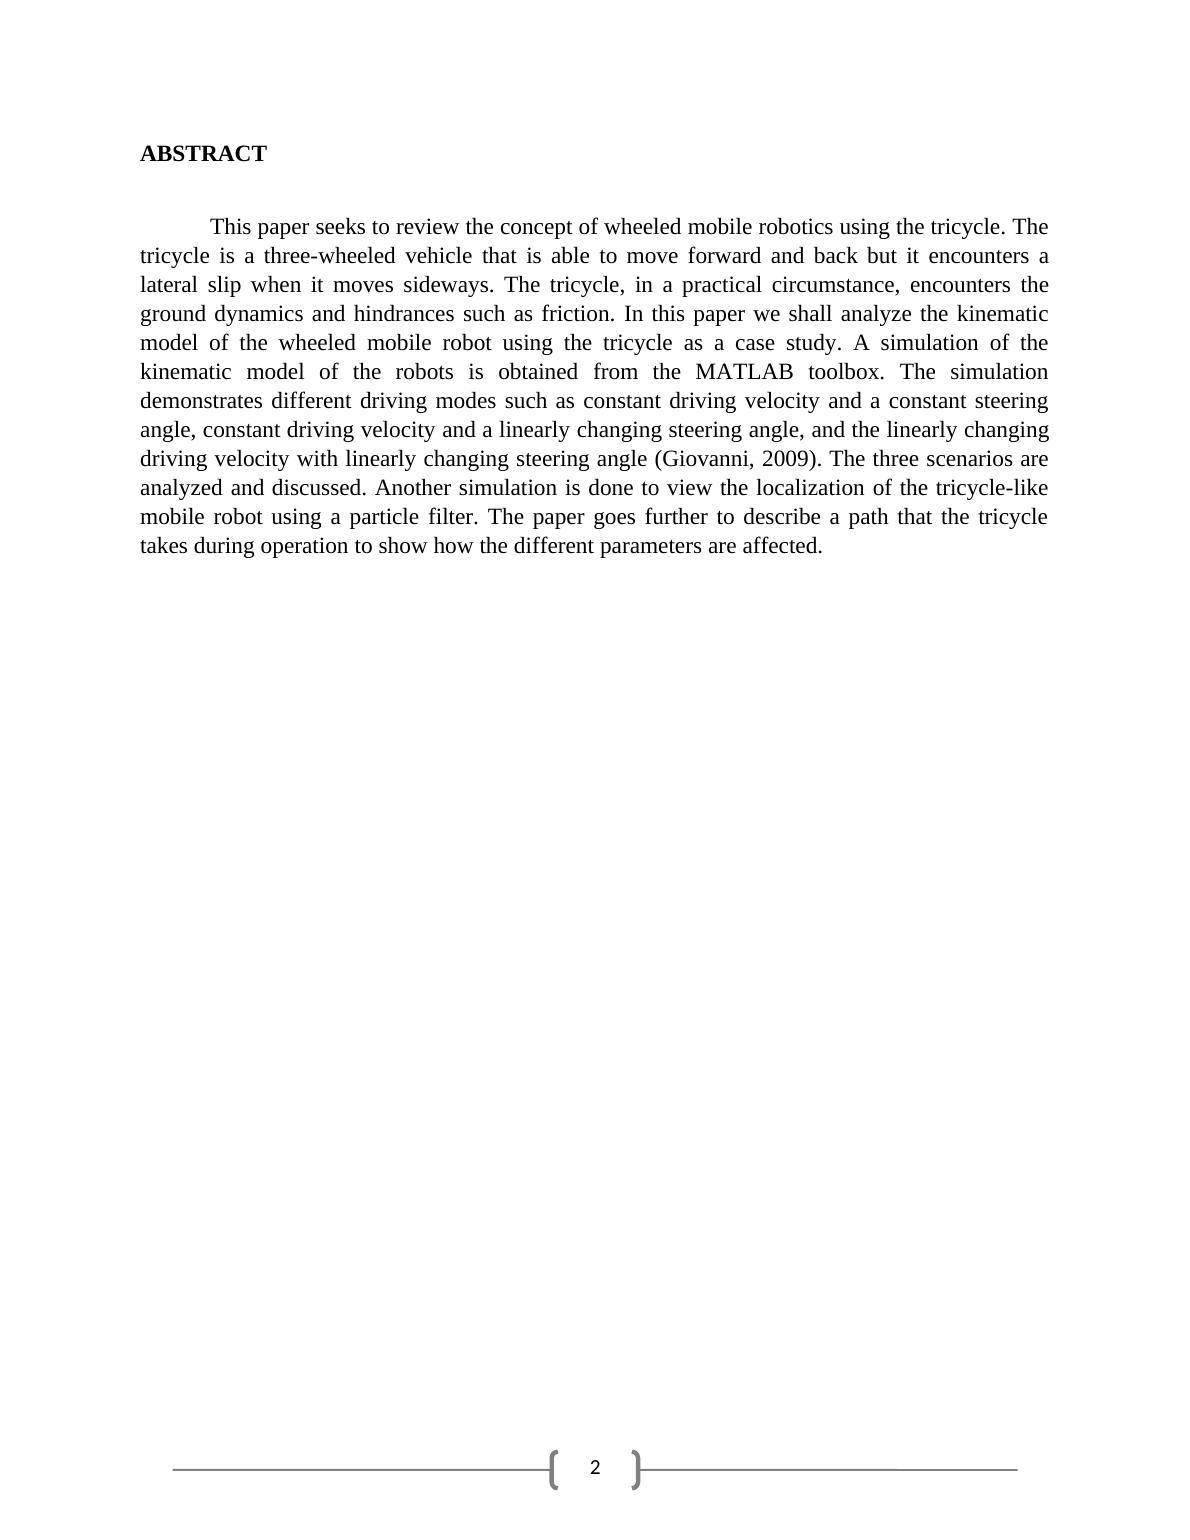 300043 Paper on Concept of Wheeled Mobile Robotics using Tricycle_2